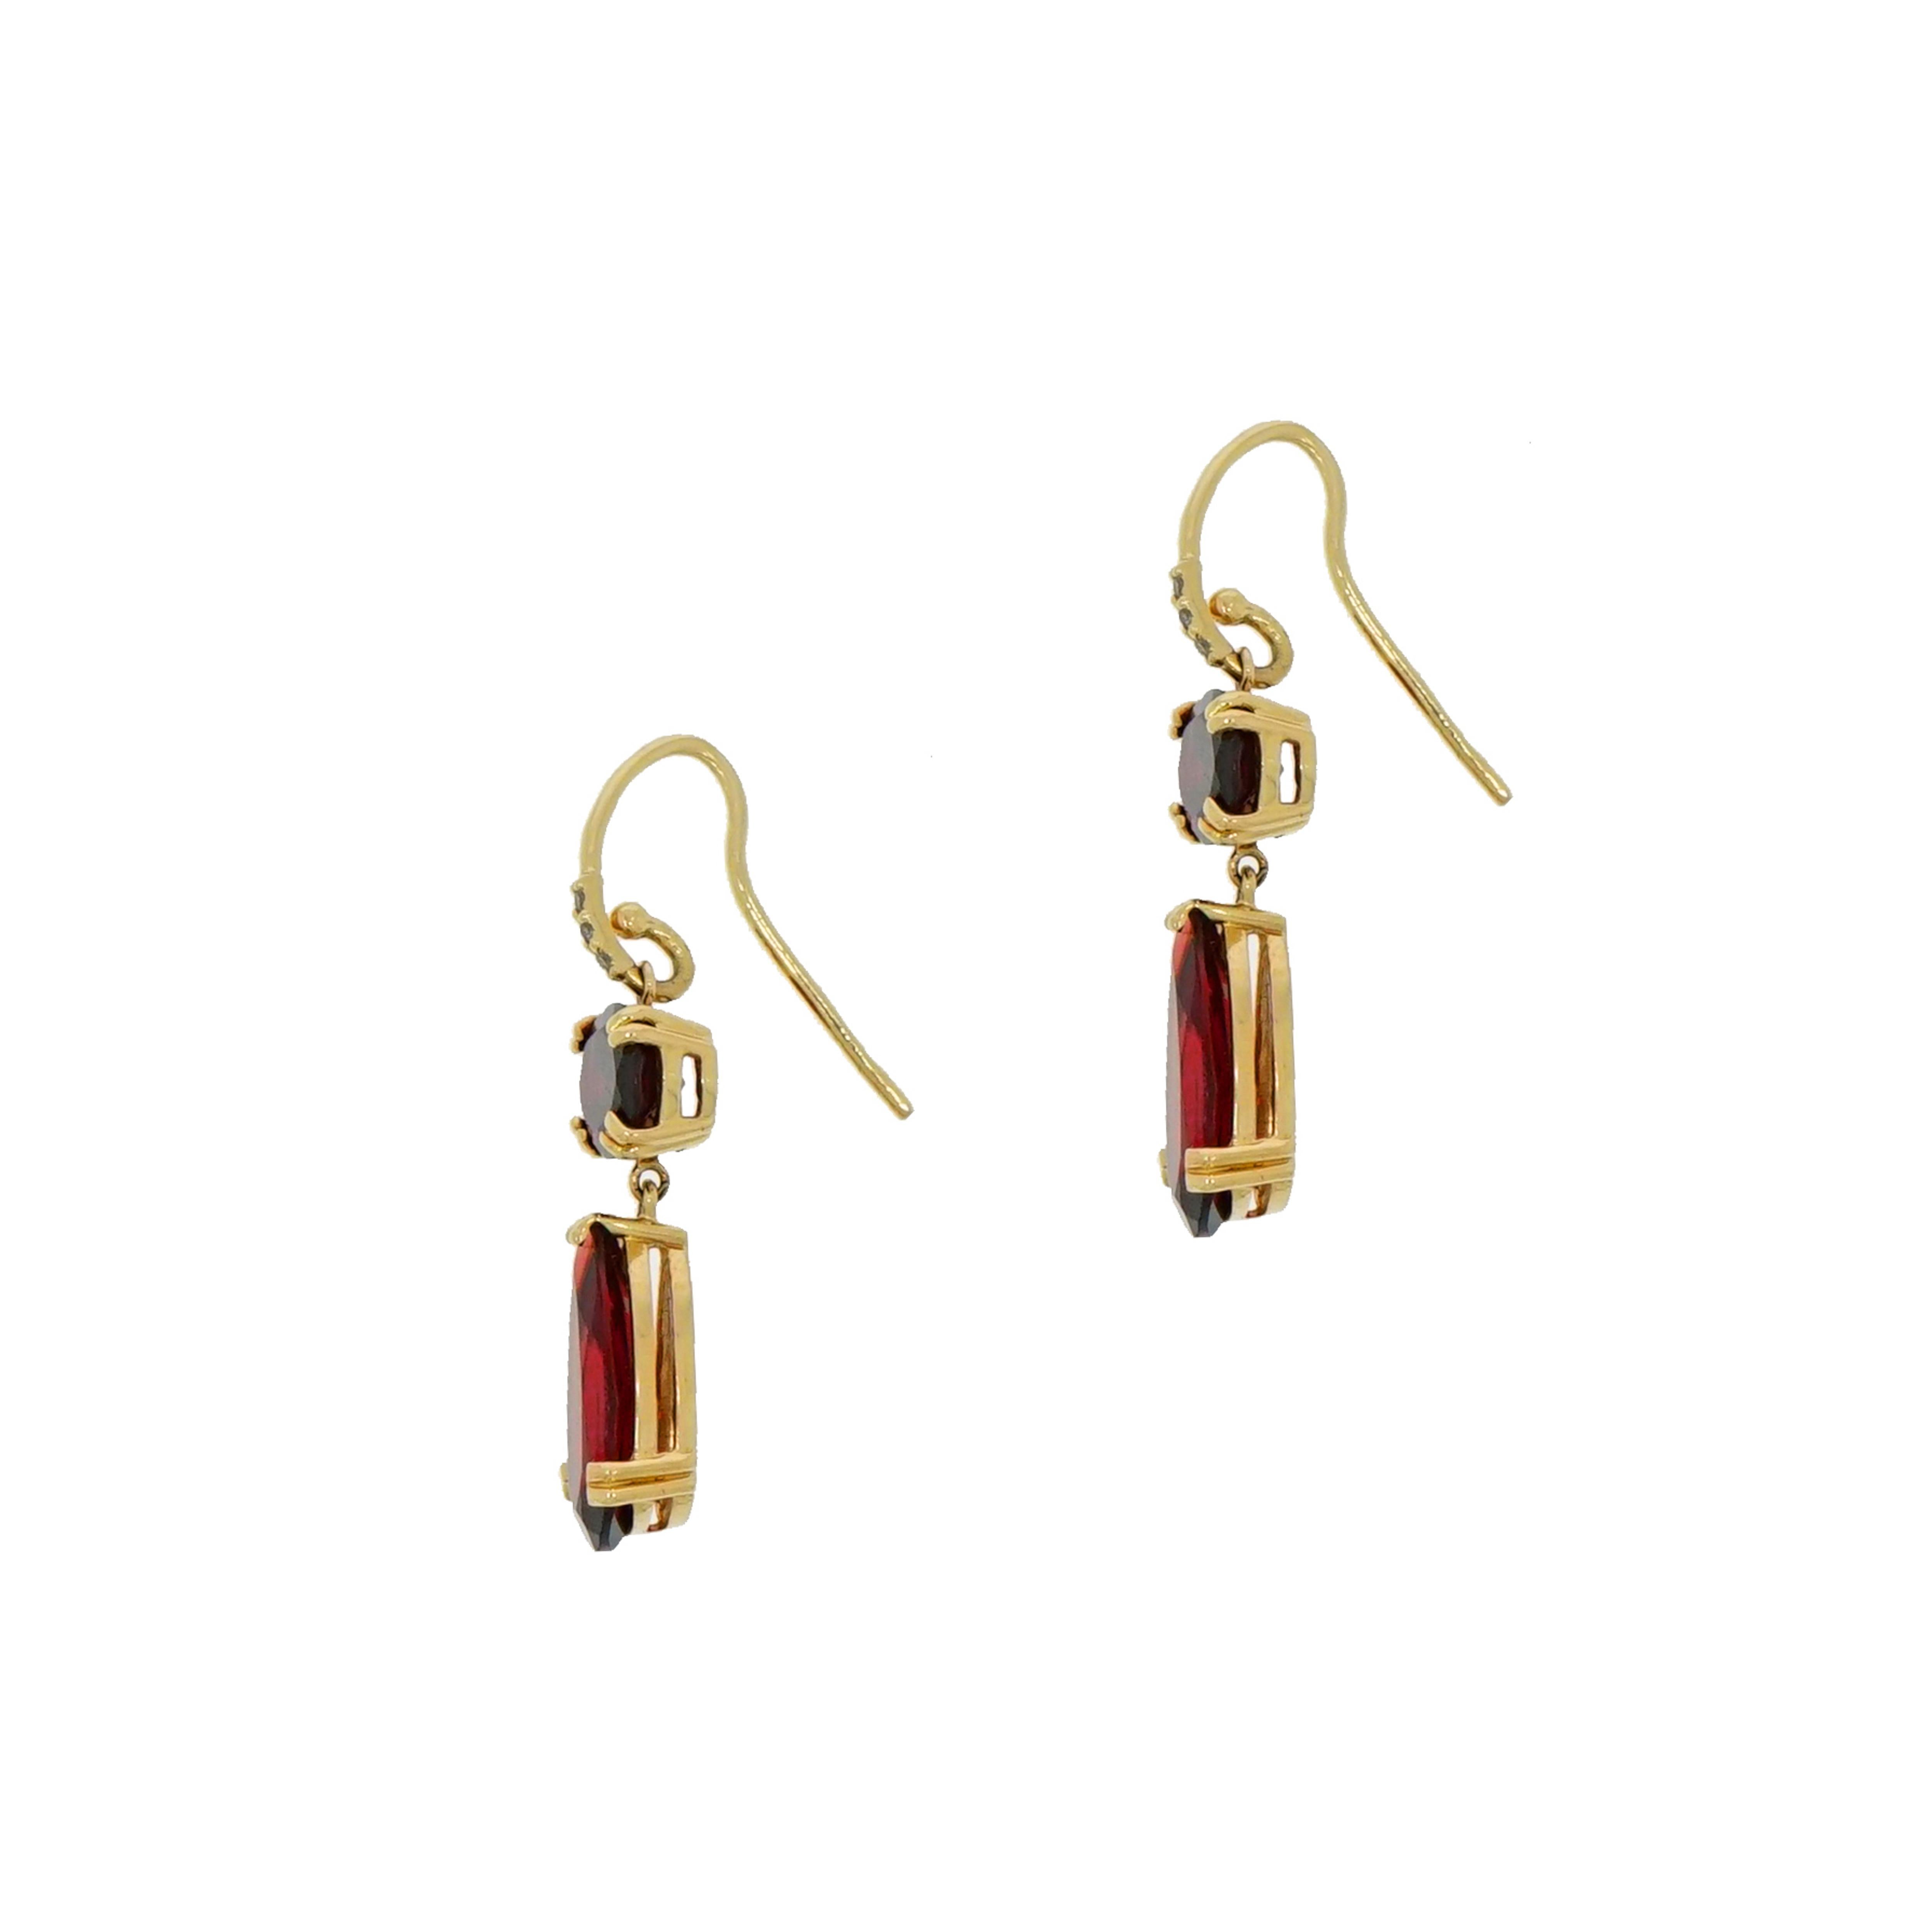 Dangling drops earrings comprised of oval and pear shaped garnets being the essence of this pair of chandelier earrings.
Handcrafted in 14k yellow gold with a wire/hook closure accented with diamonds.
Just the perfect amount of sparkles!!